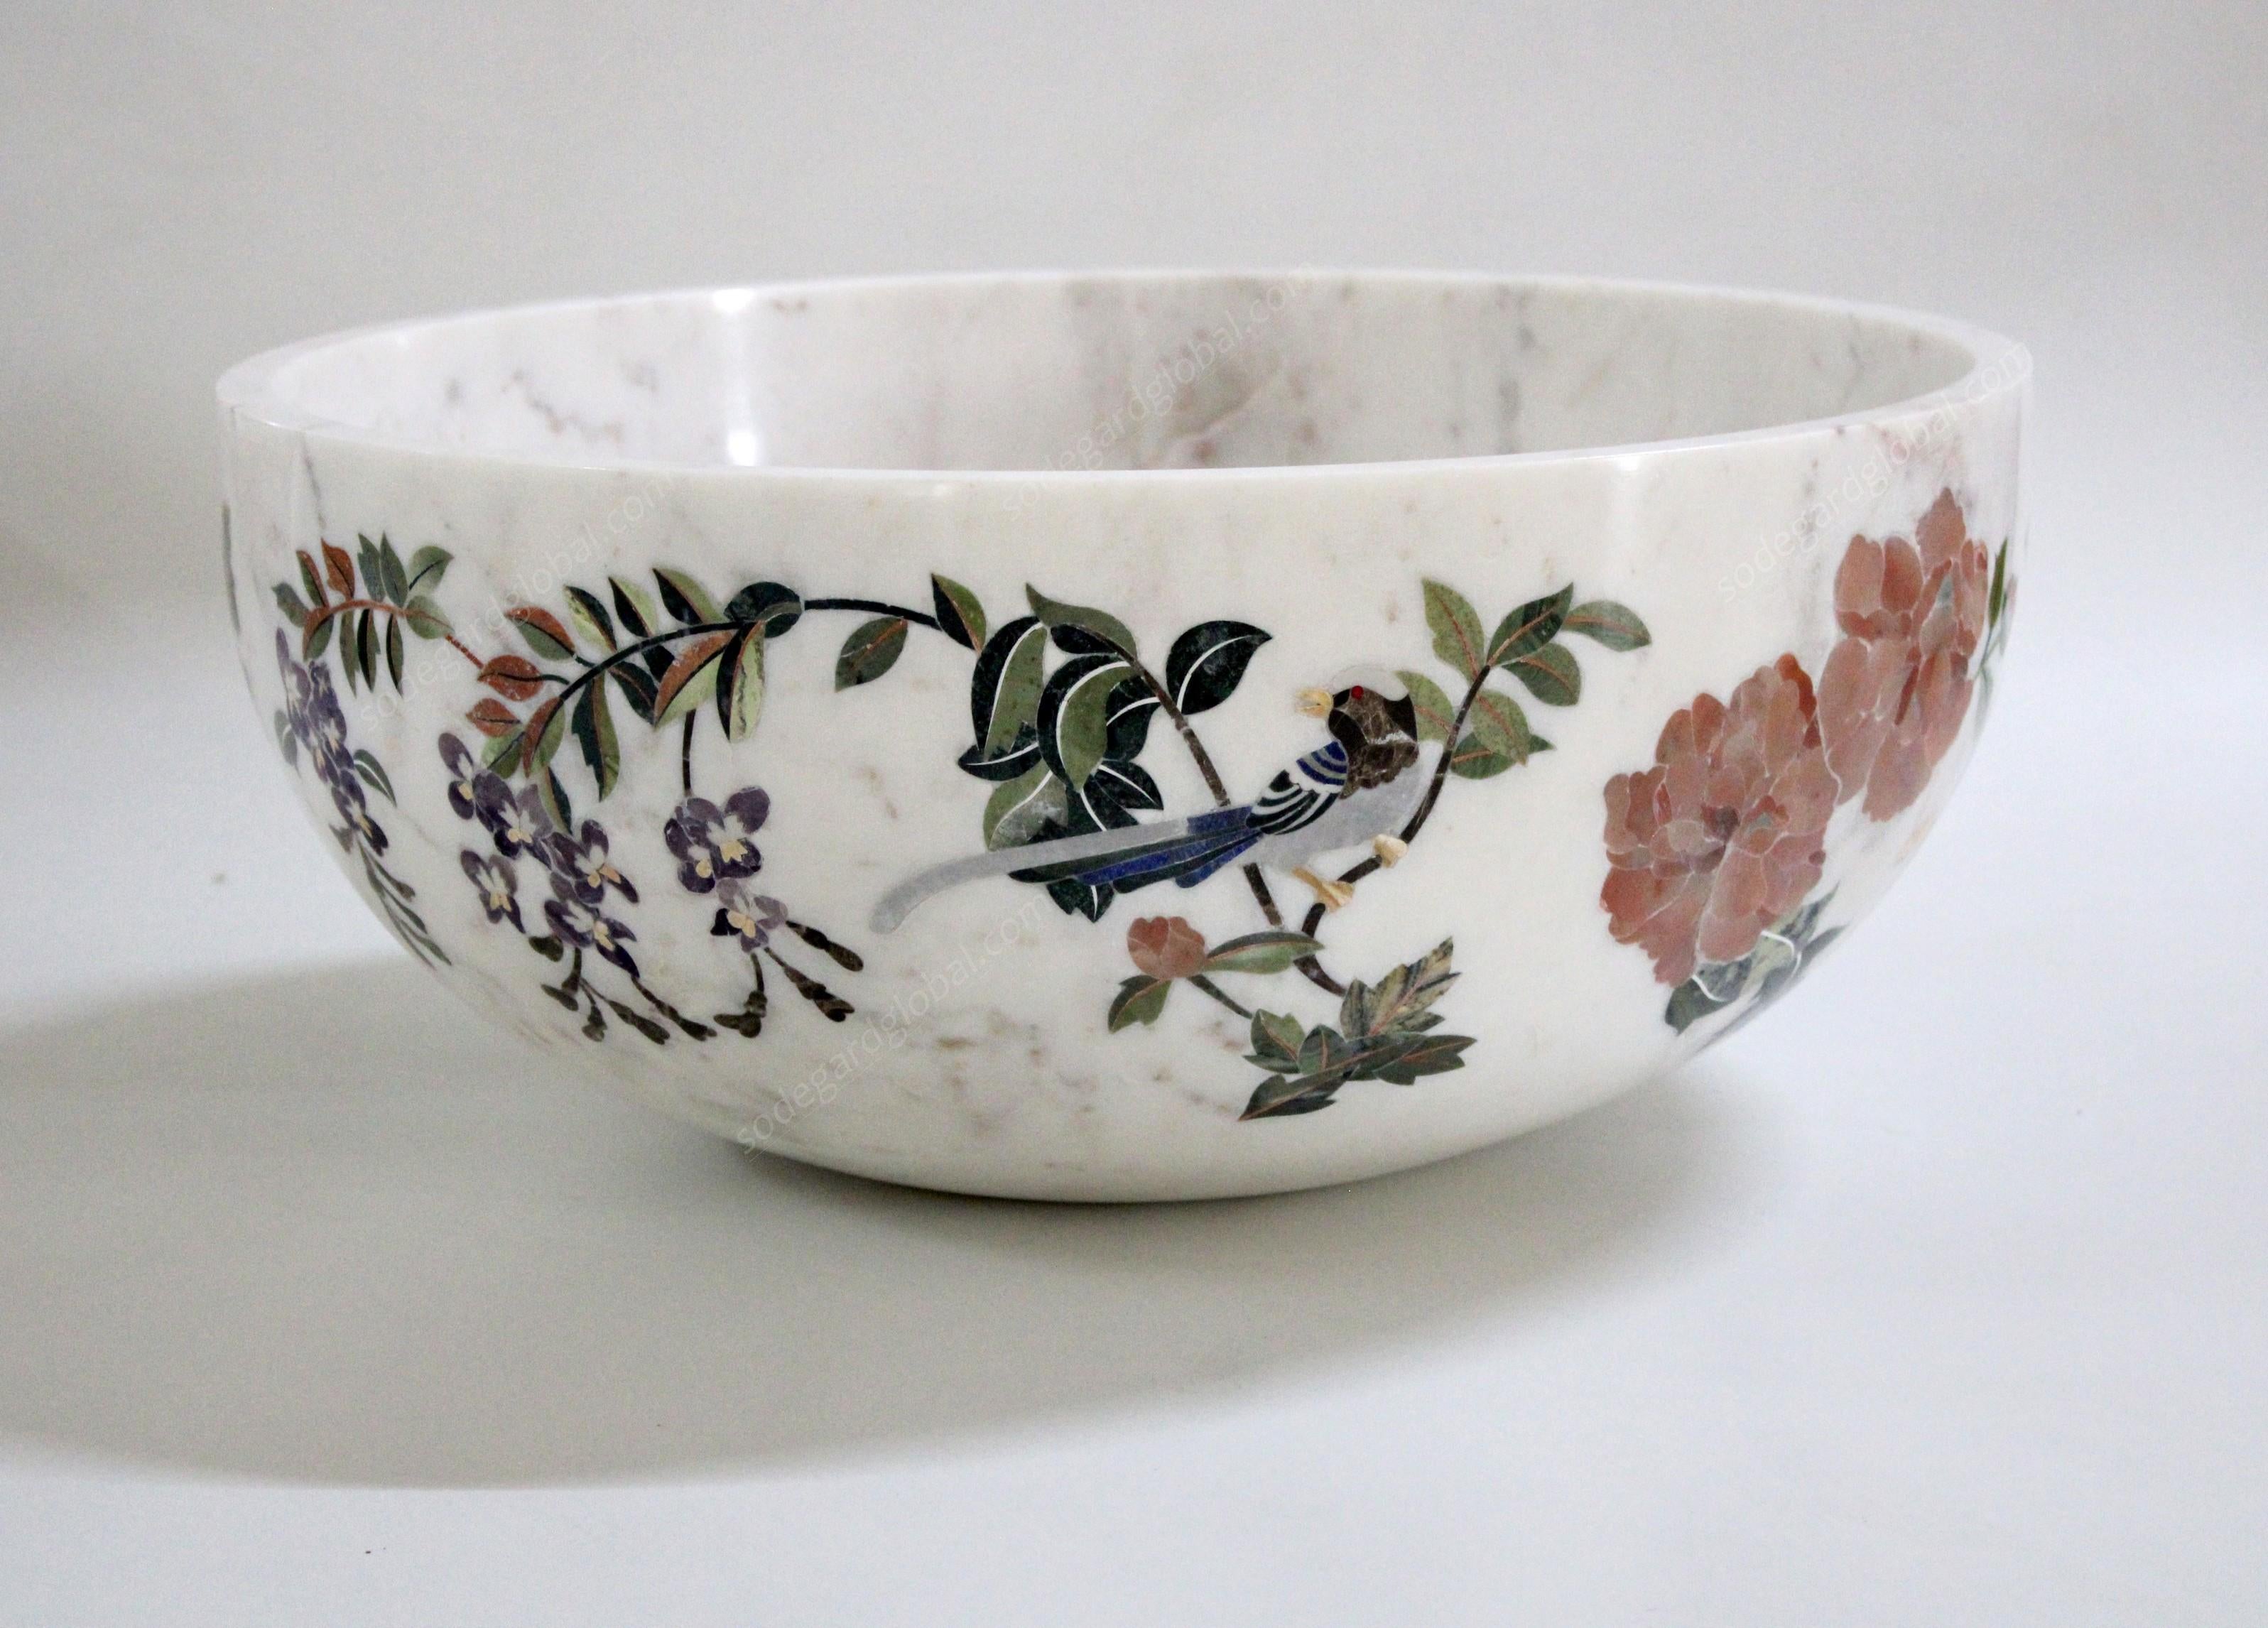 Handmade Ornamenti Bowl Inlay in White Marble by Stephanie Odegard For Sale 5